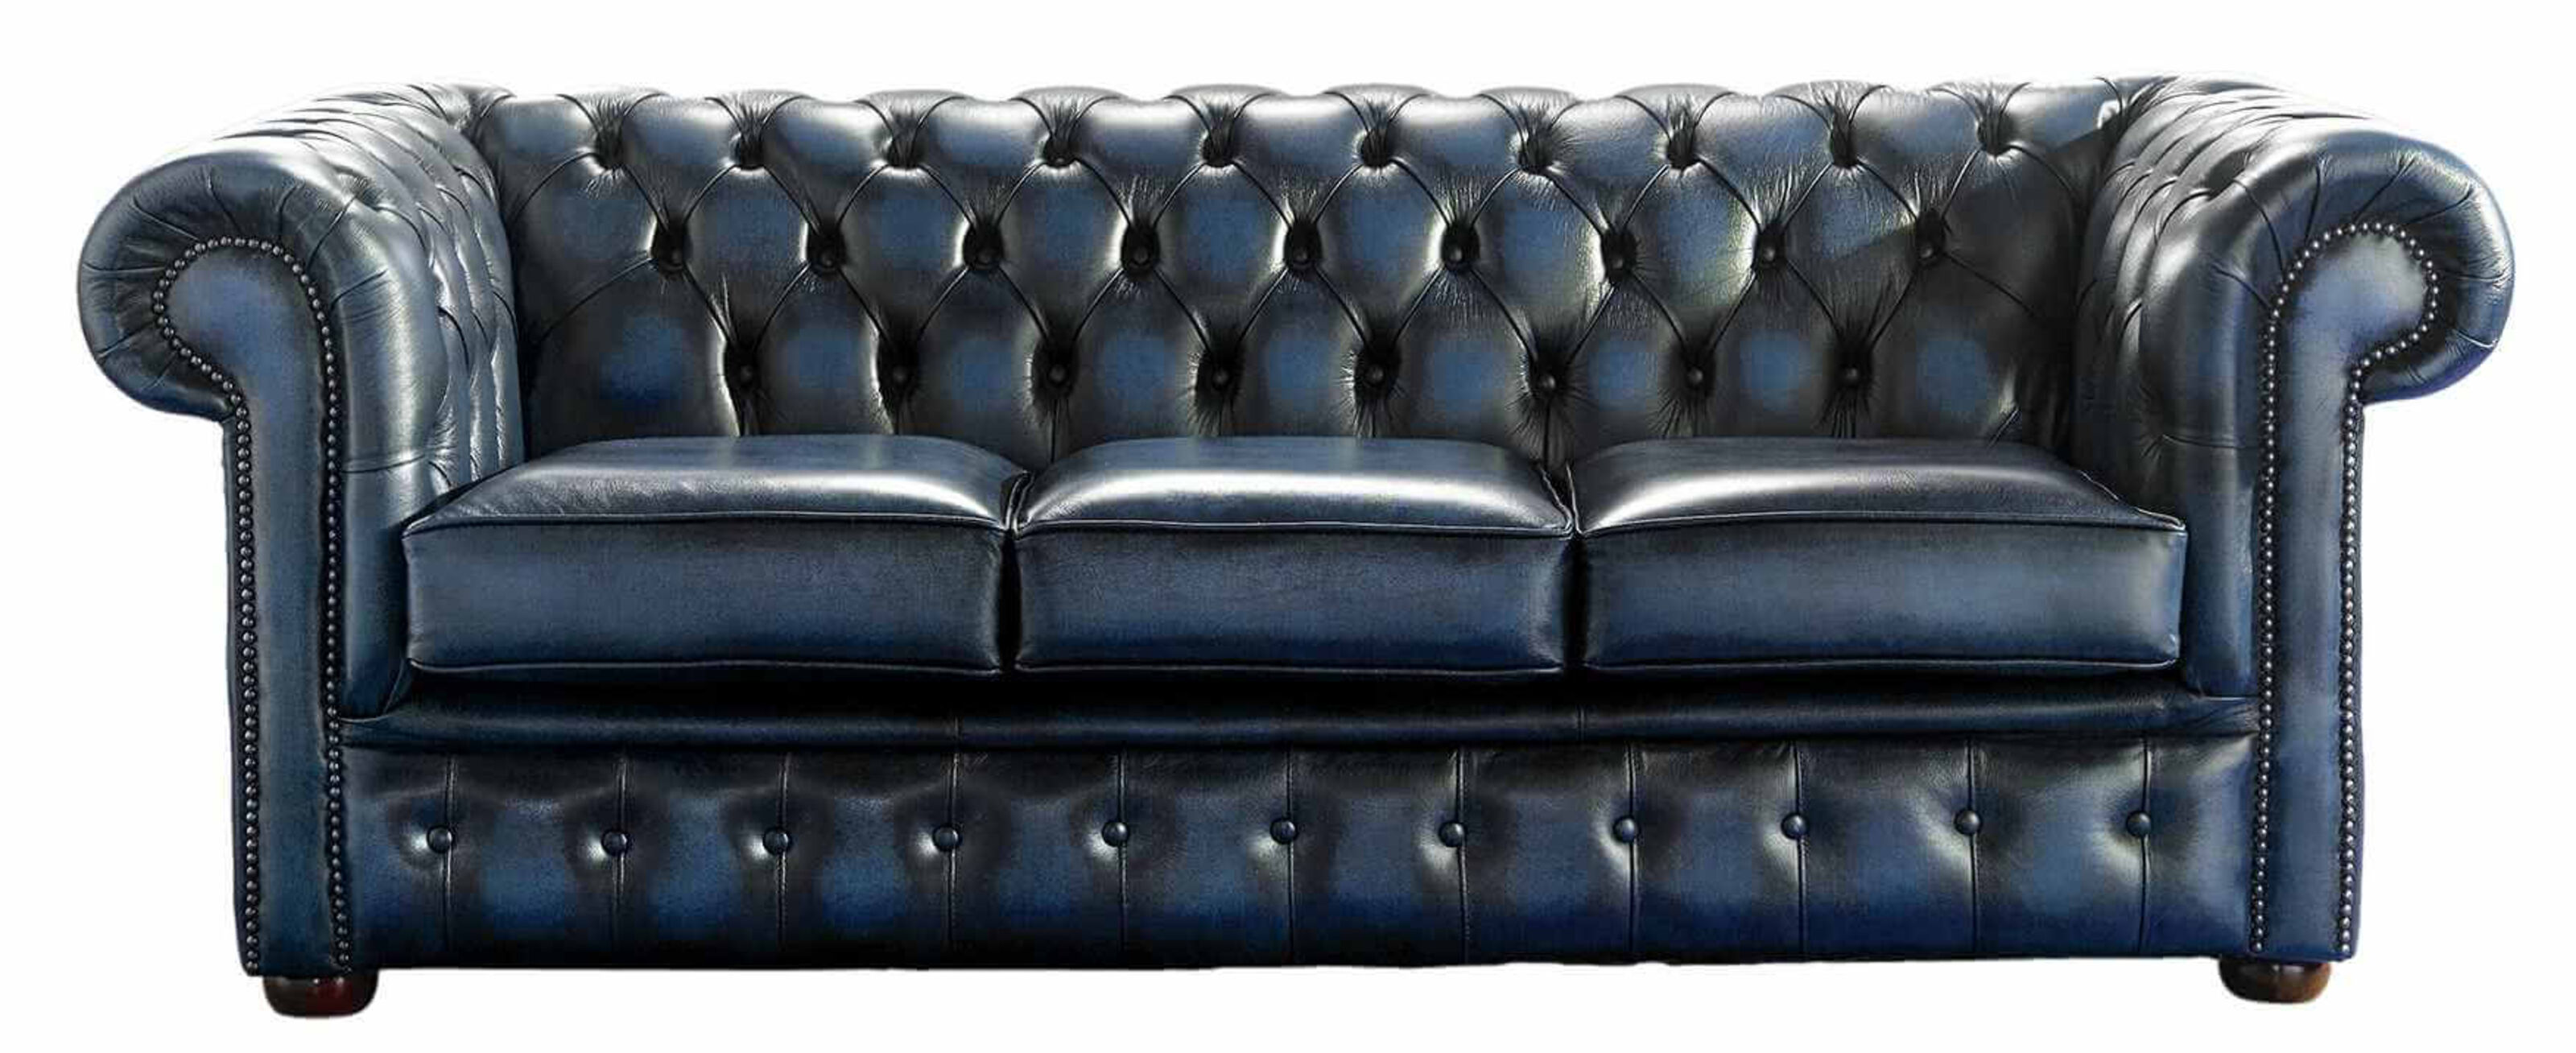 Classic Comfort Available Chesterfield Couches for Sale  %Post Title